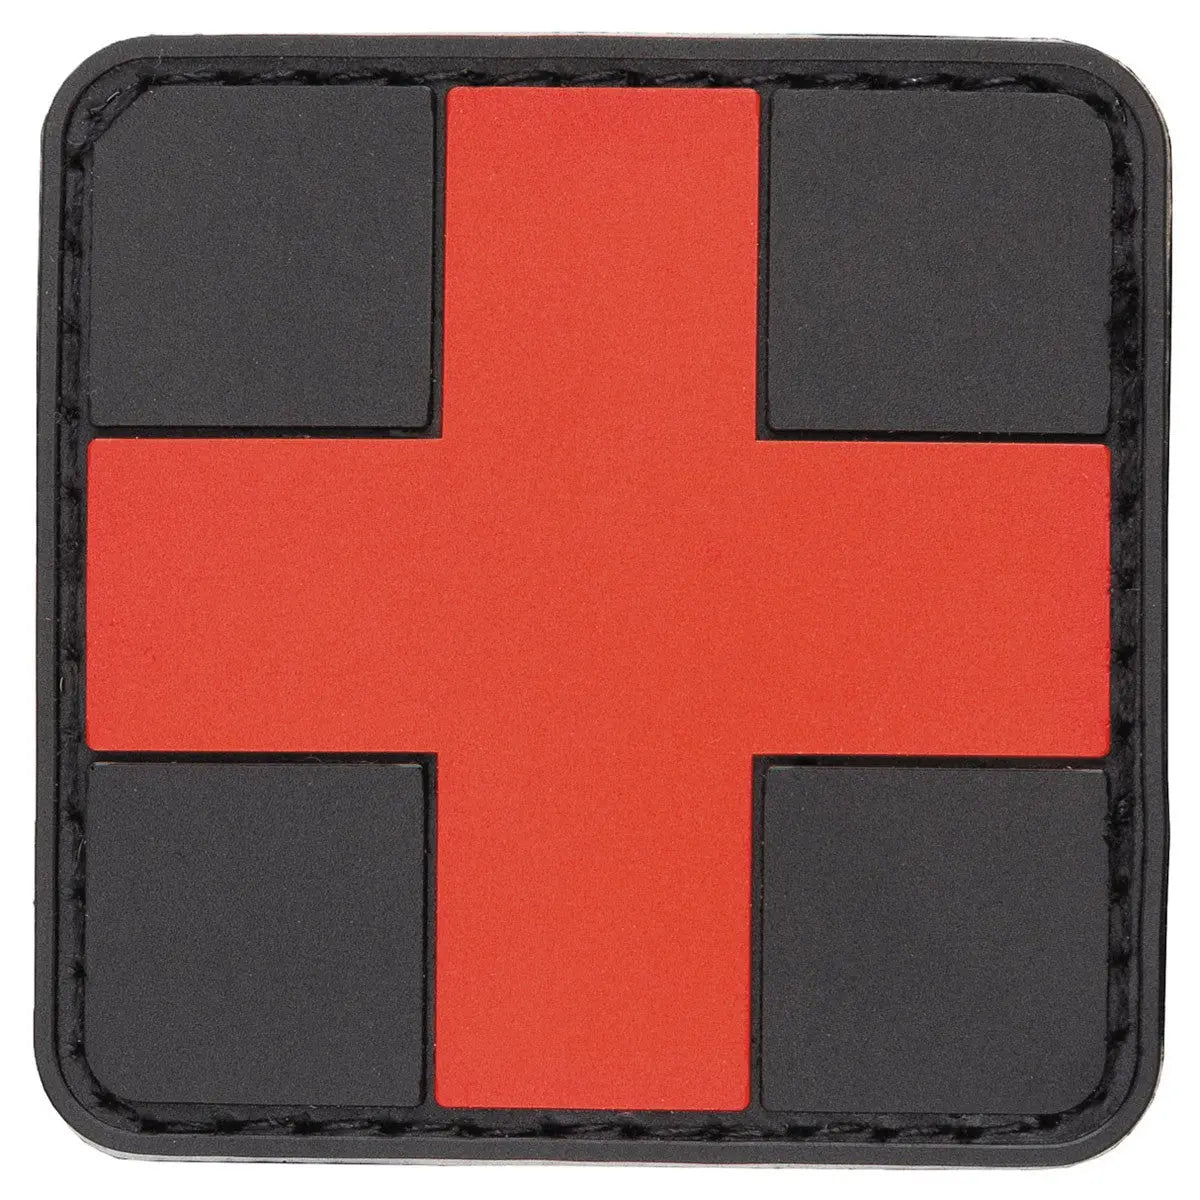 Velcro Patch, "FIRST AID", black-red, 3D, 5 x 5 cm